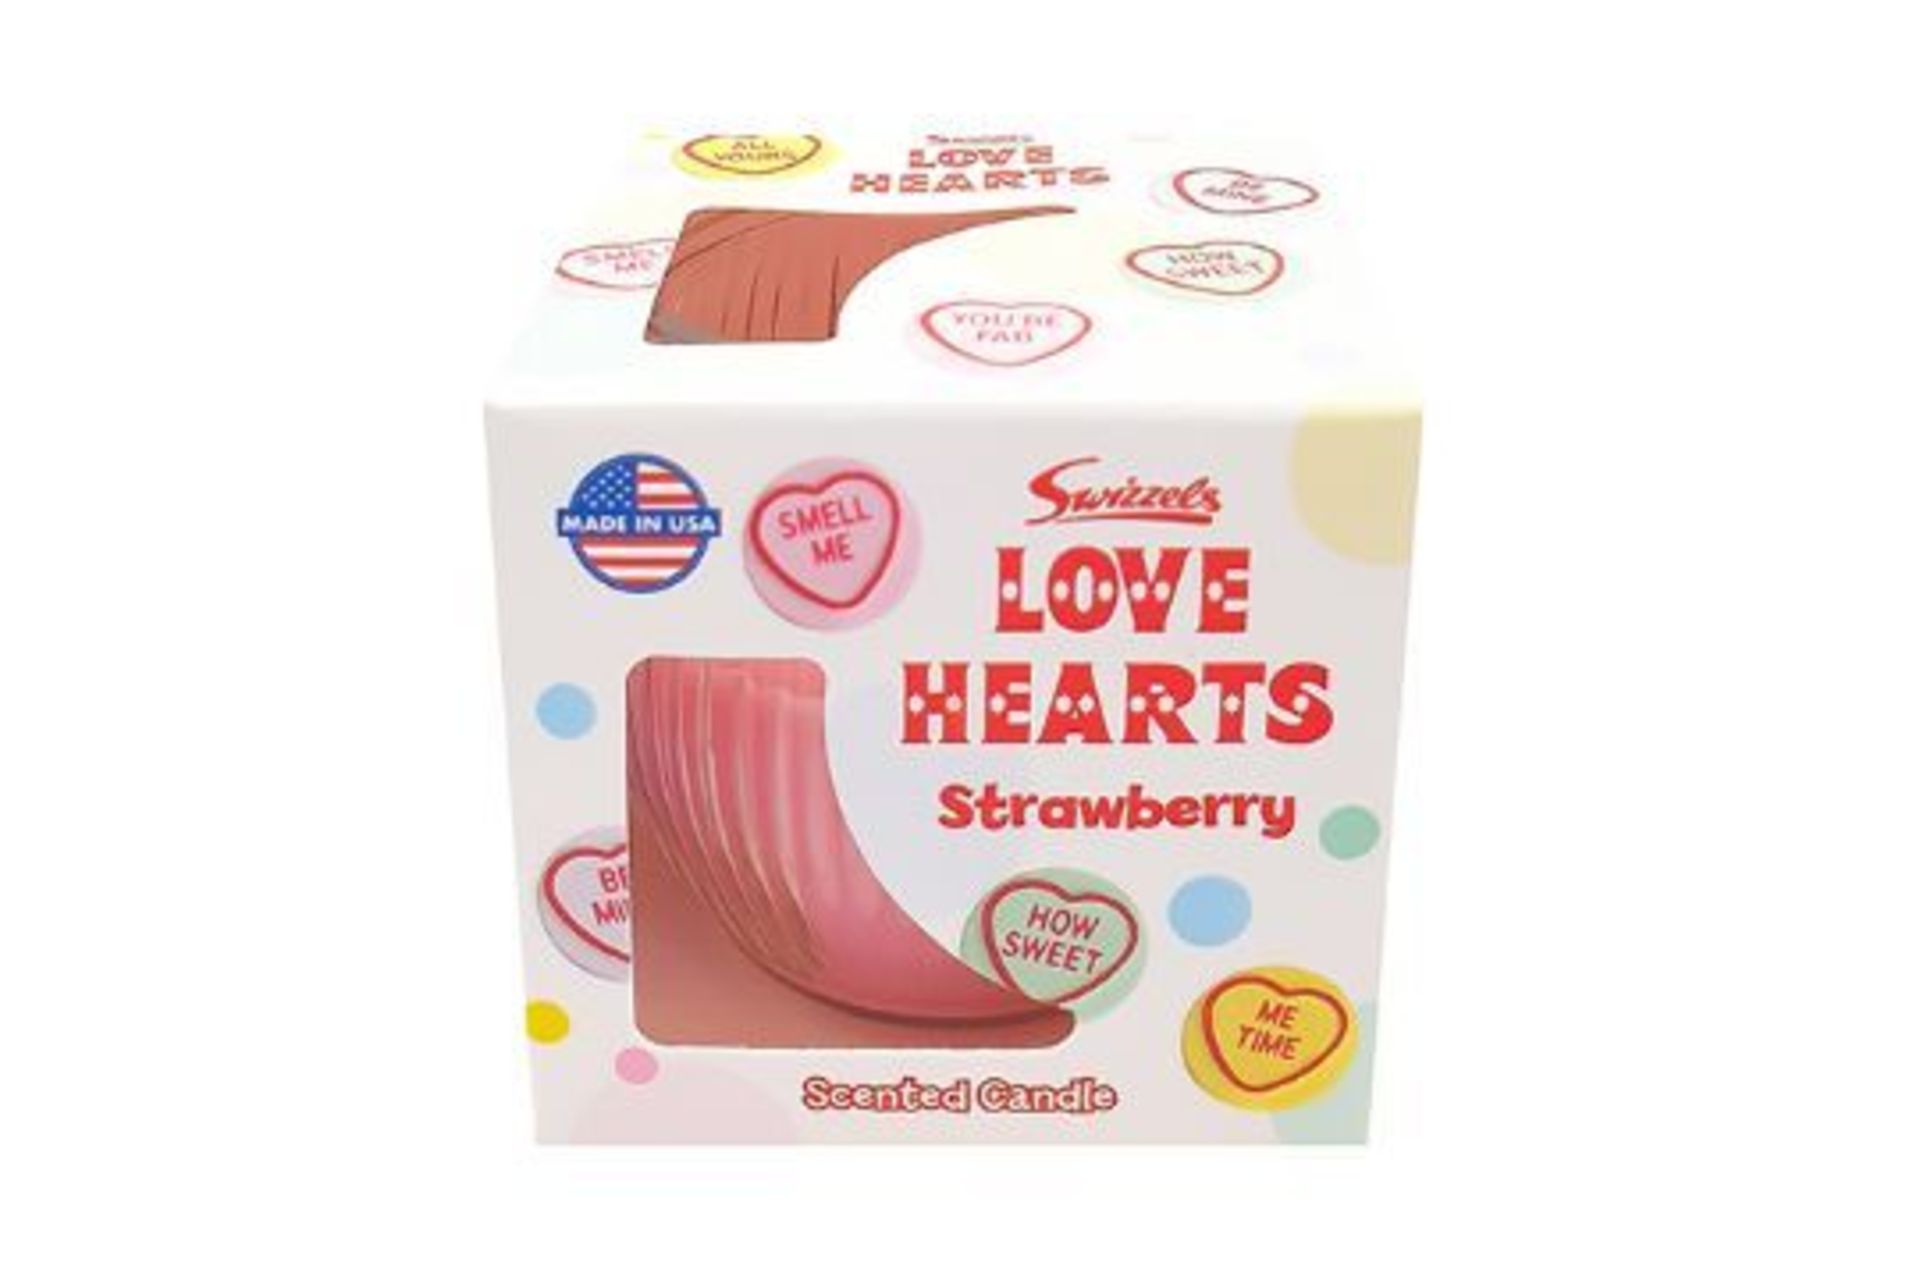 Swizzle 85g Love Heart Strawberry Scented Candle